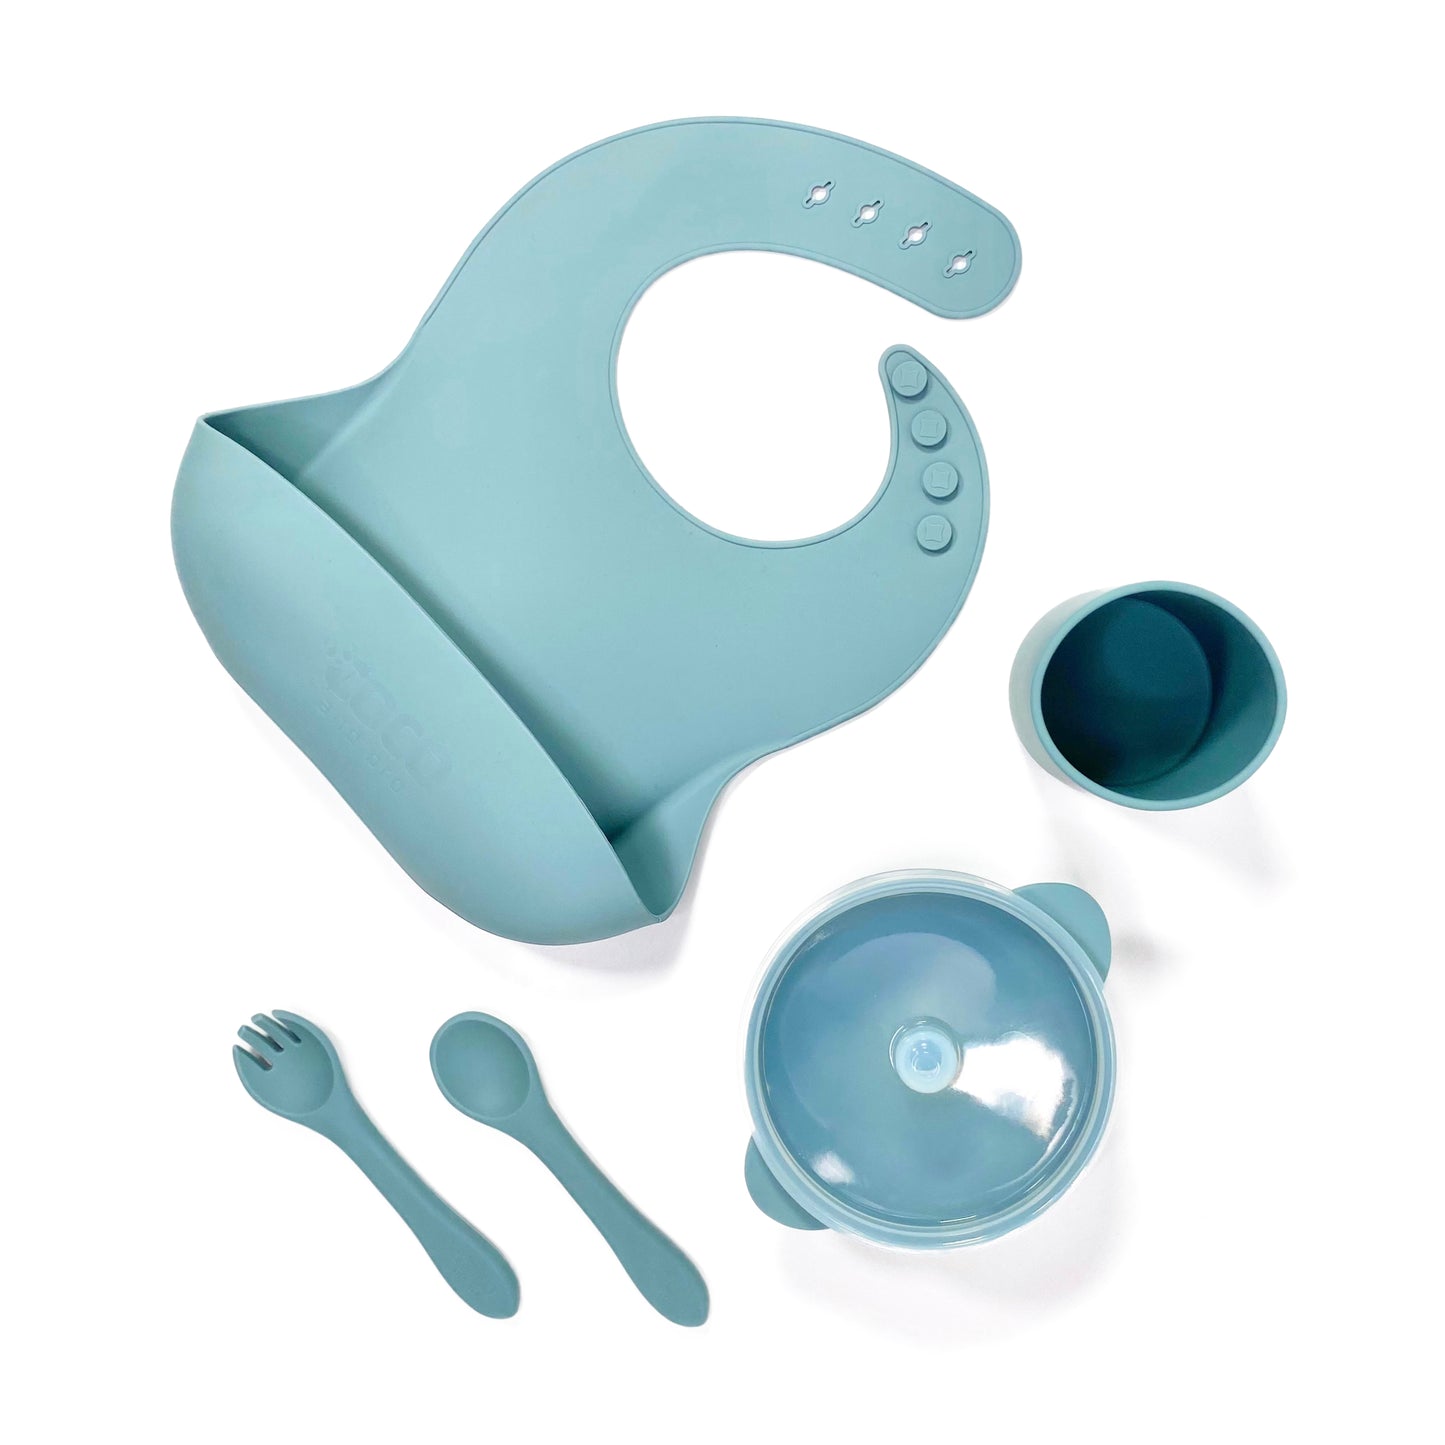 A sky blue silicone children’s feeding set, including adjustable silicone bib with crumb catcher, silicone drinking cup, silicone bowl with lid and silicone cutlery.